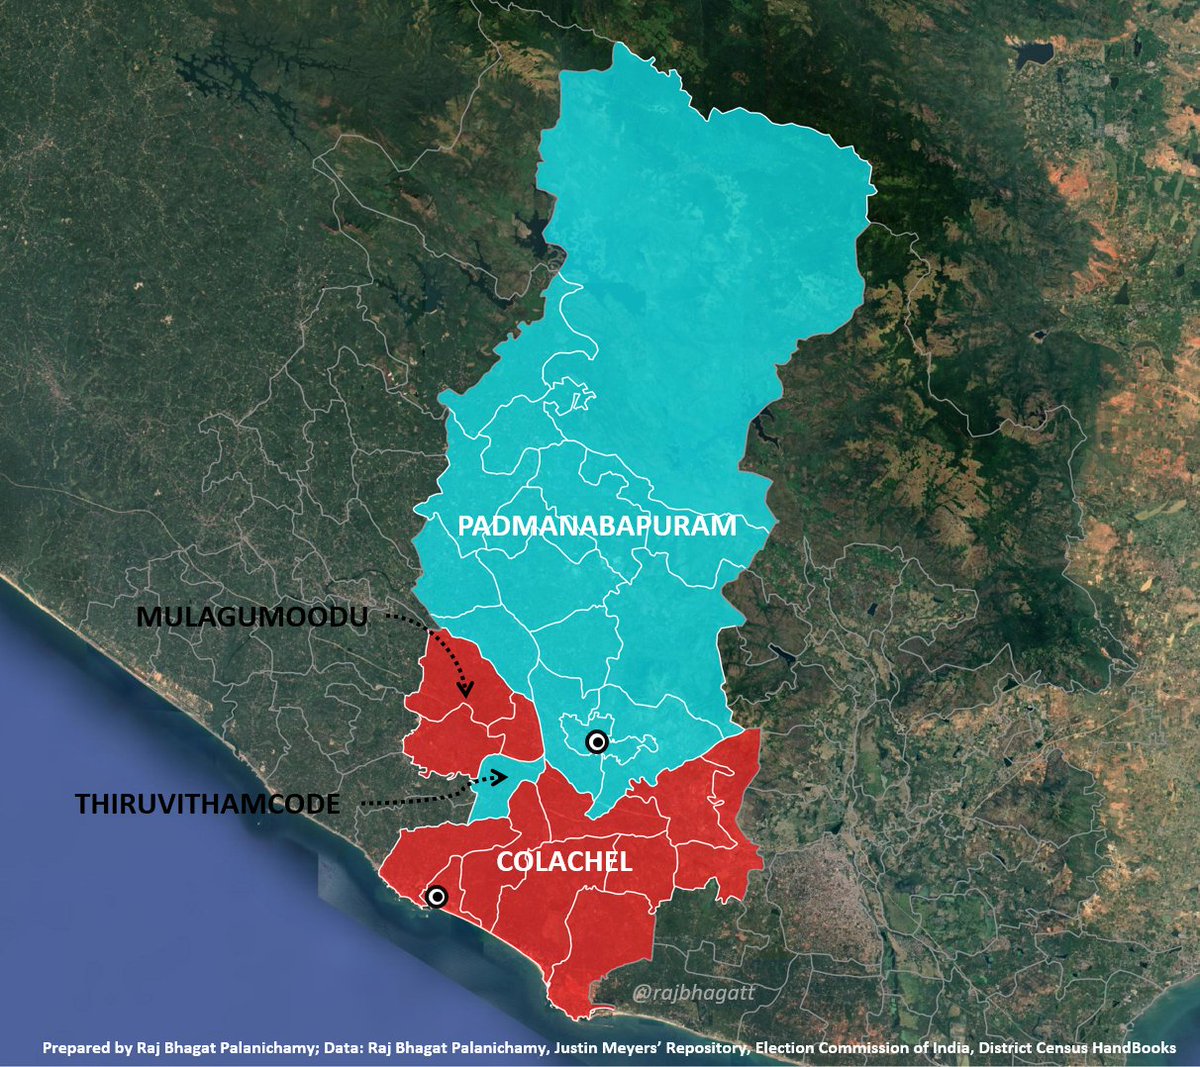 This doesnt mean that they haven't created islands during delineation process. For some reason, Thiruvithamcode rev.village has been added to Padmanabapuram constituency thus dividing Colachel const into 2 piecesThiruvathamcode gives its name to Travancore kingdom (FYI)5/n